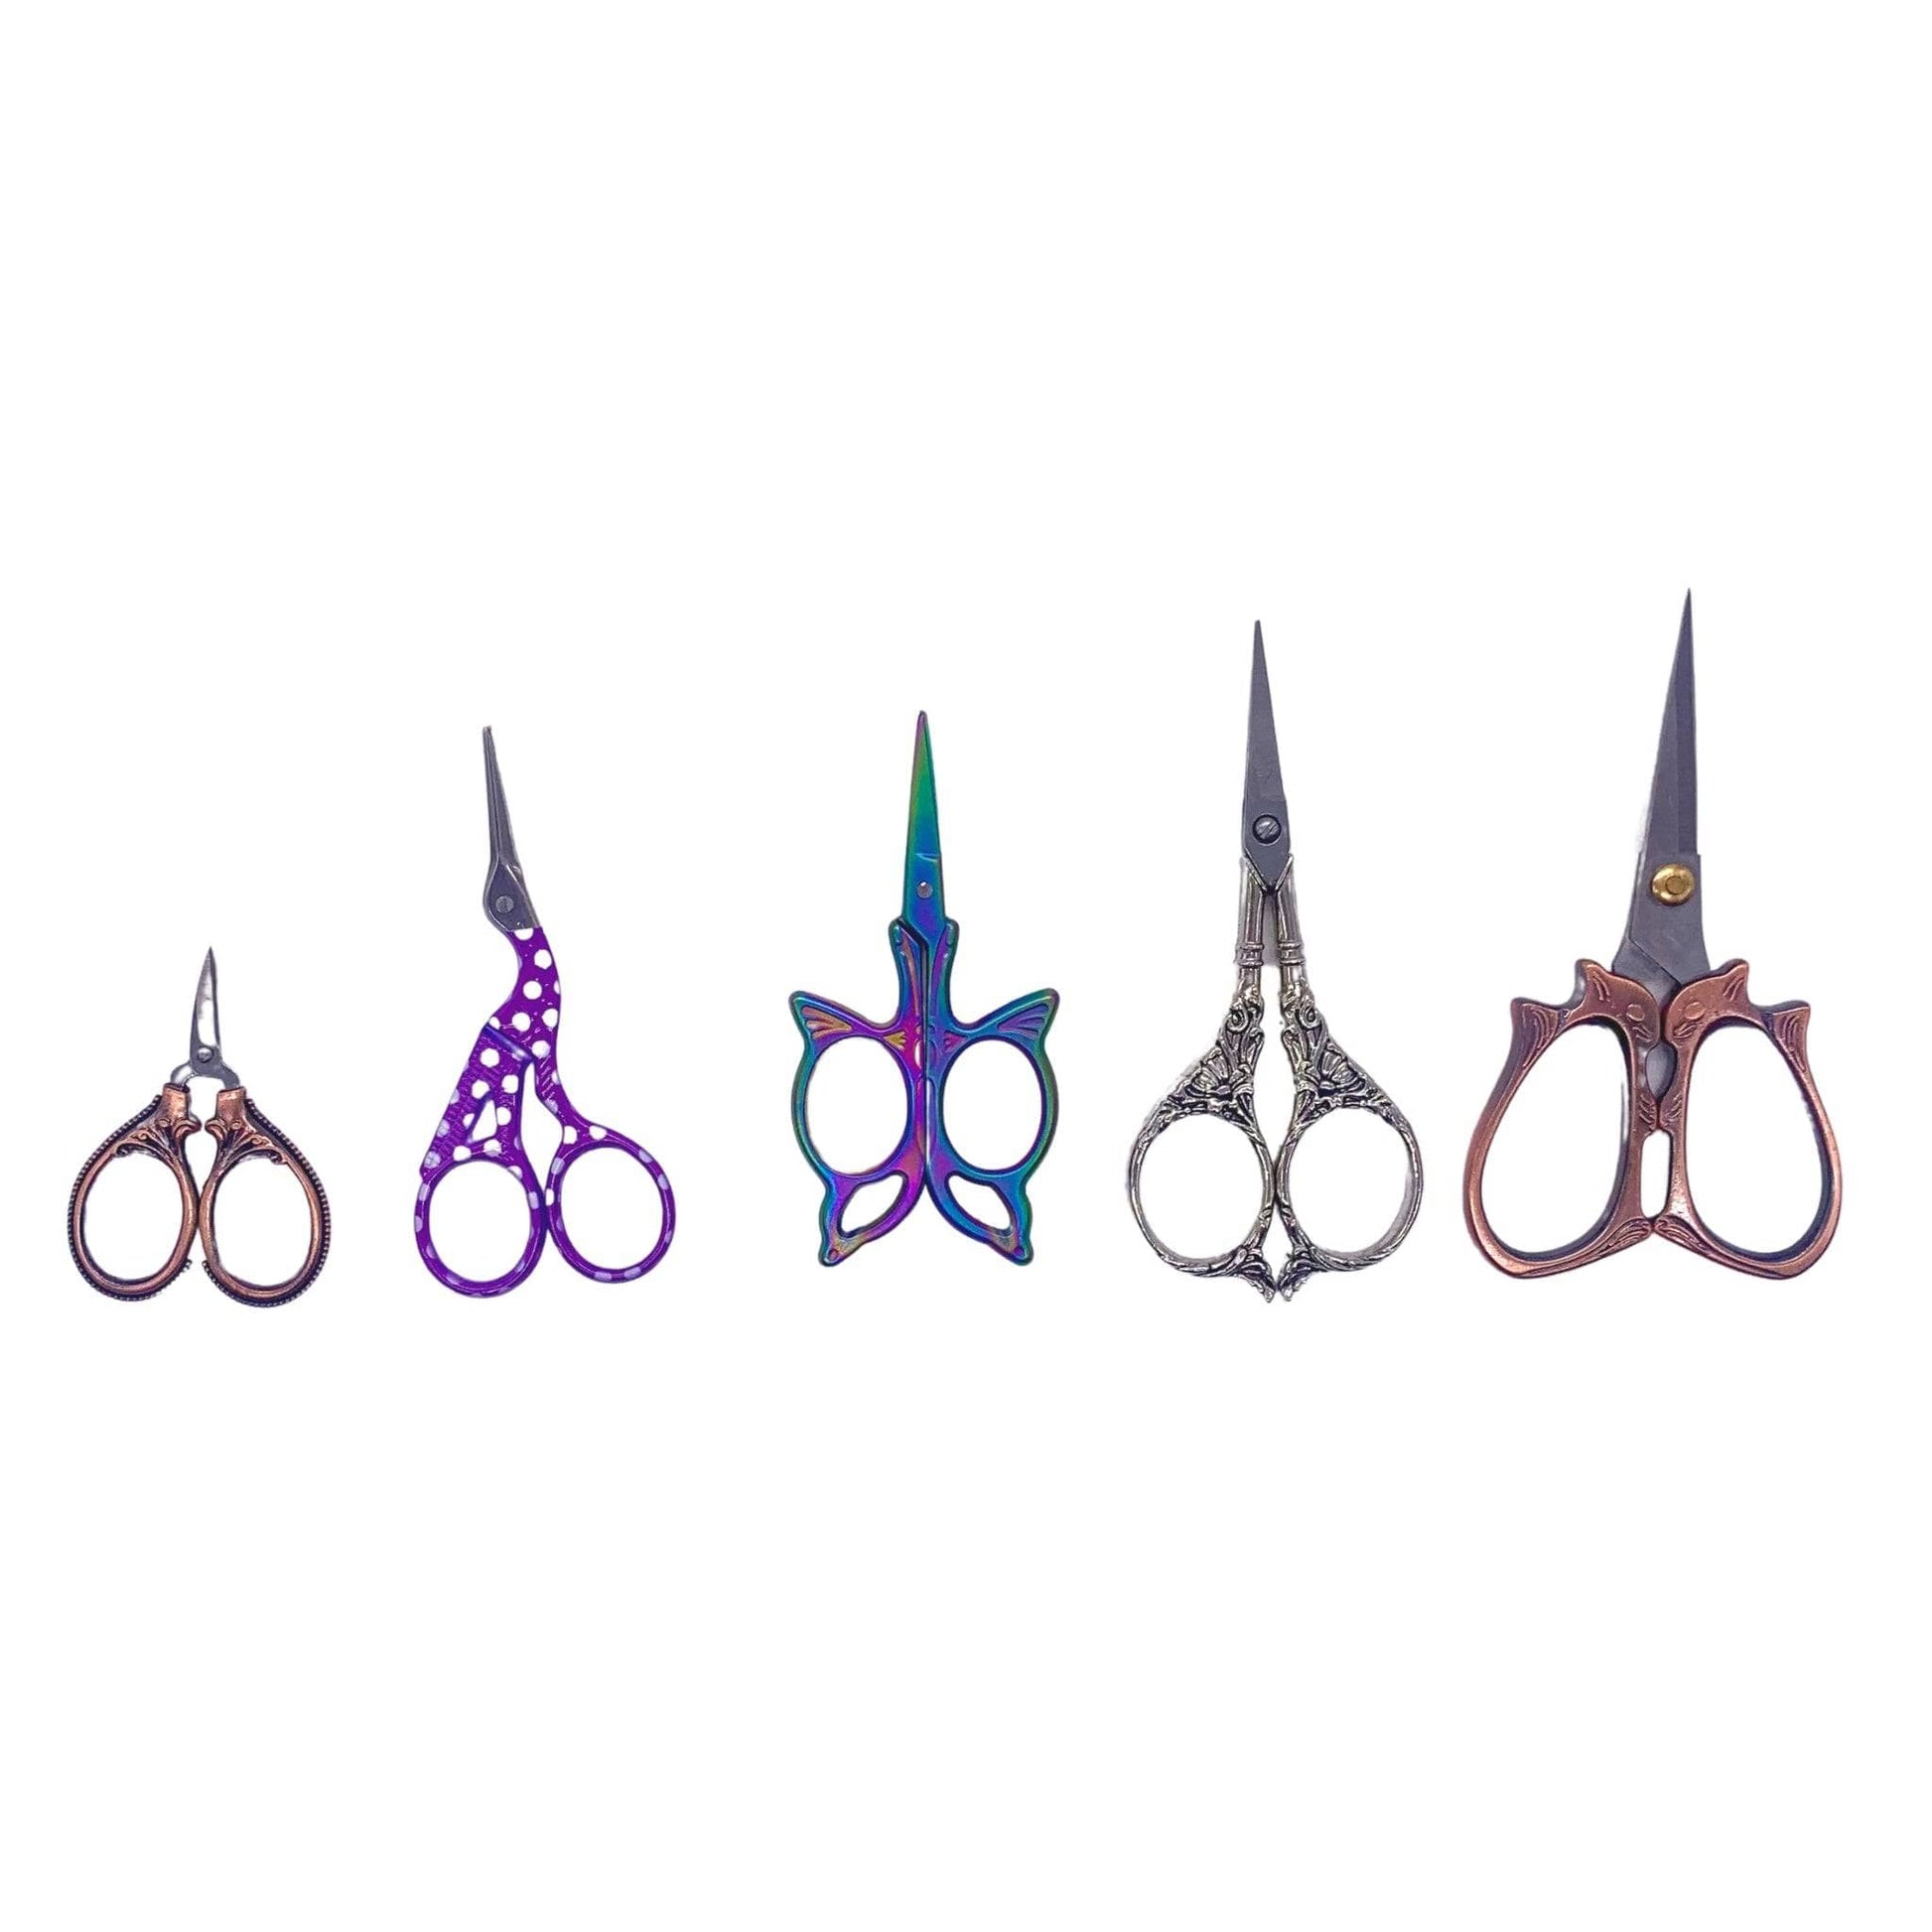 Five Pairs of Unique Crafting Scissors on a white background.